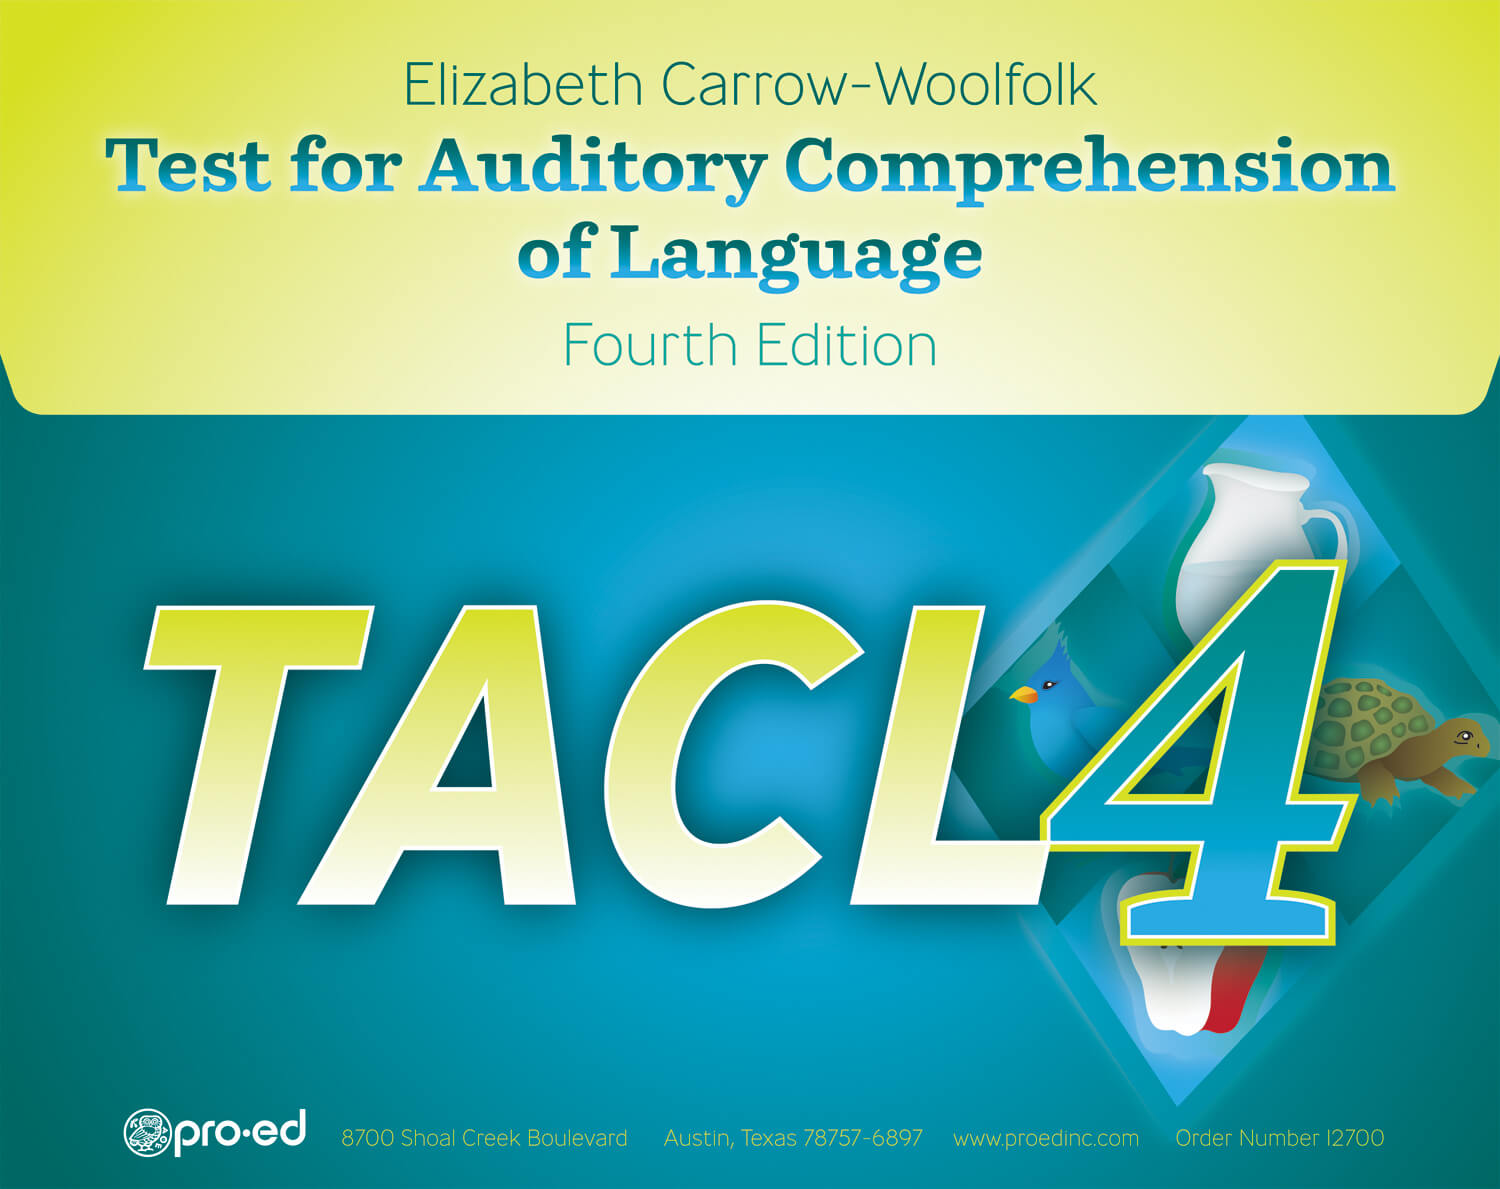 TACL-4: Test for Auditory Comprehension of Language 4th Ed - 